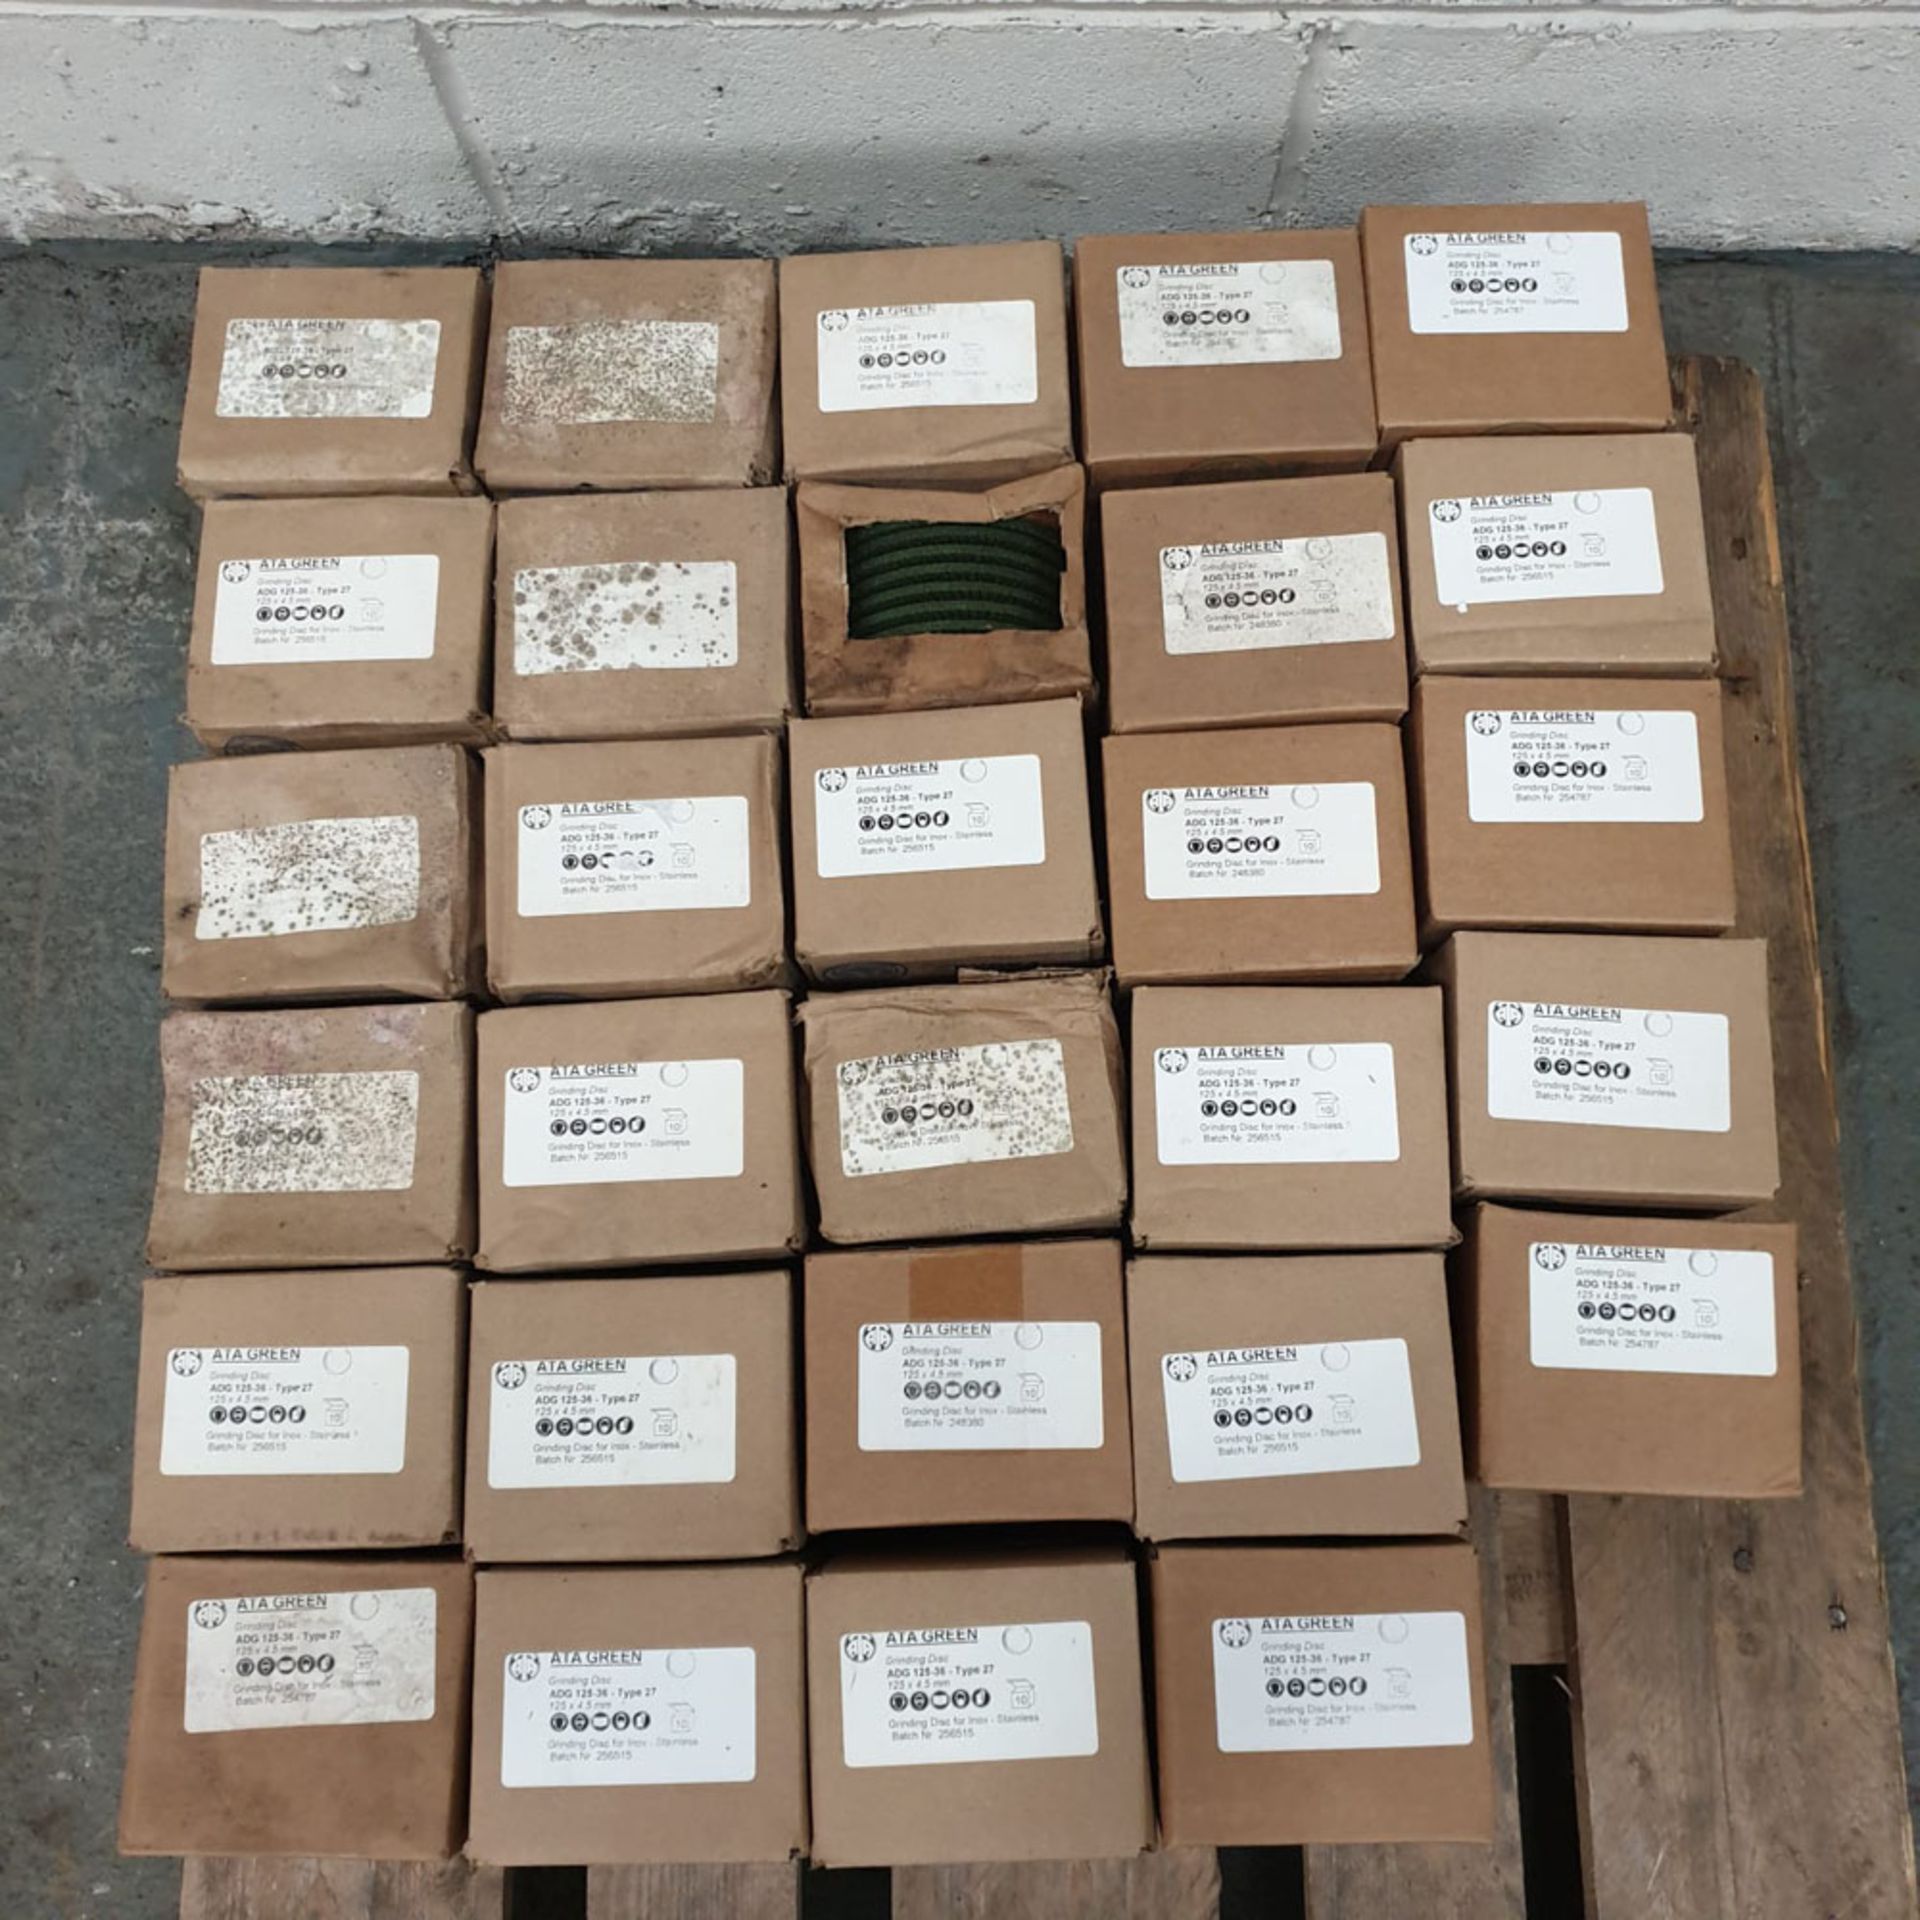 29 x Boxes of 10 ADG 125-36 Type 27 Grinding Disks. Size 125 x 4.5mm.